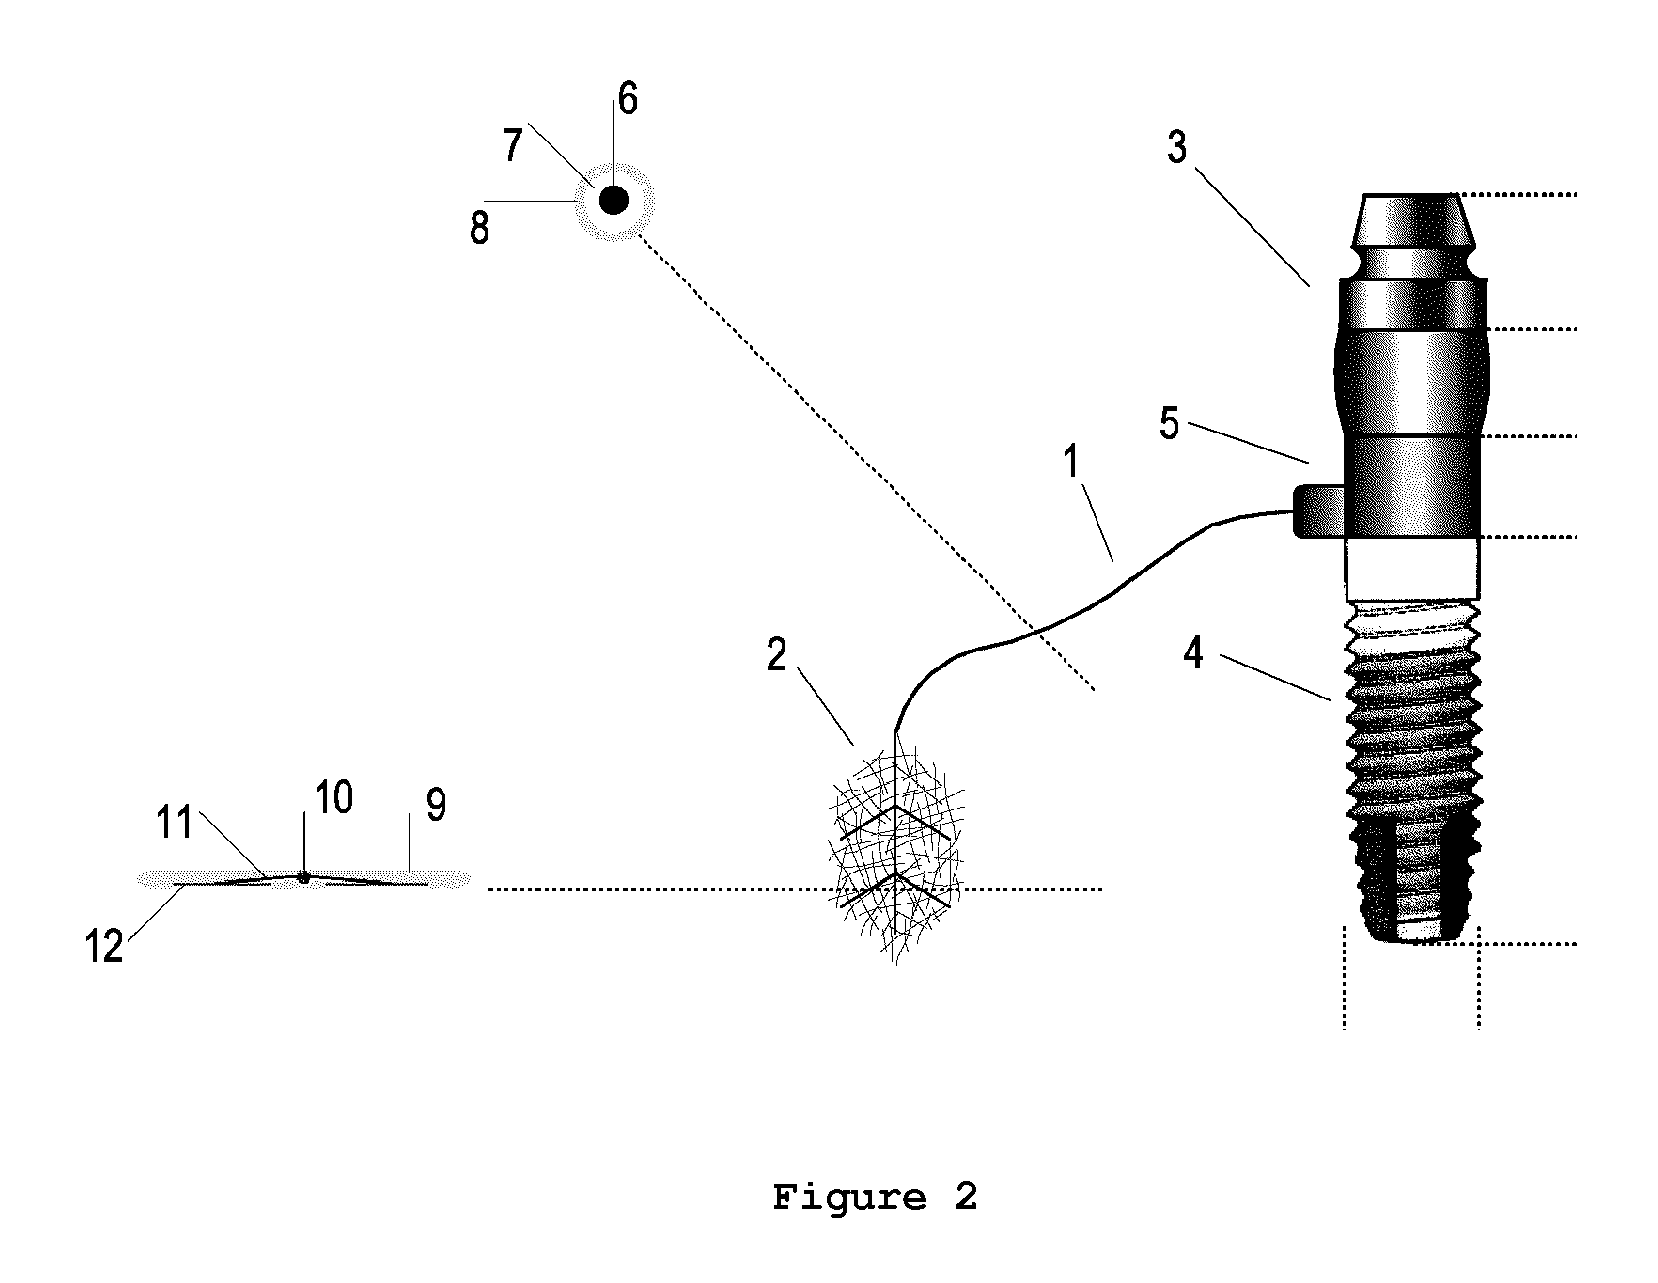 Dental abutment with a force transducer interfacing with a nerve